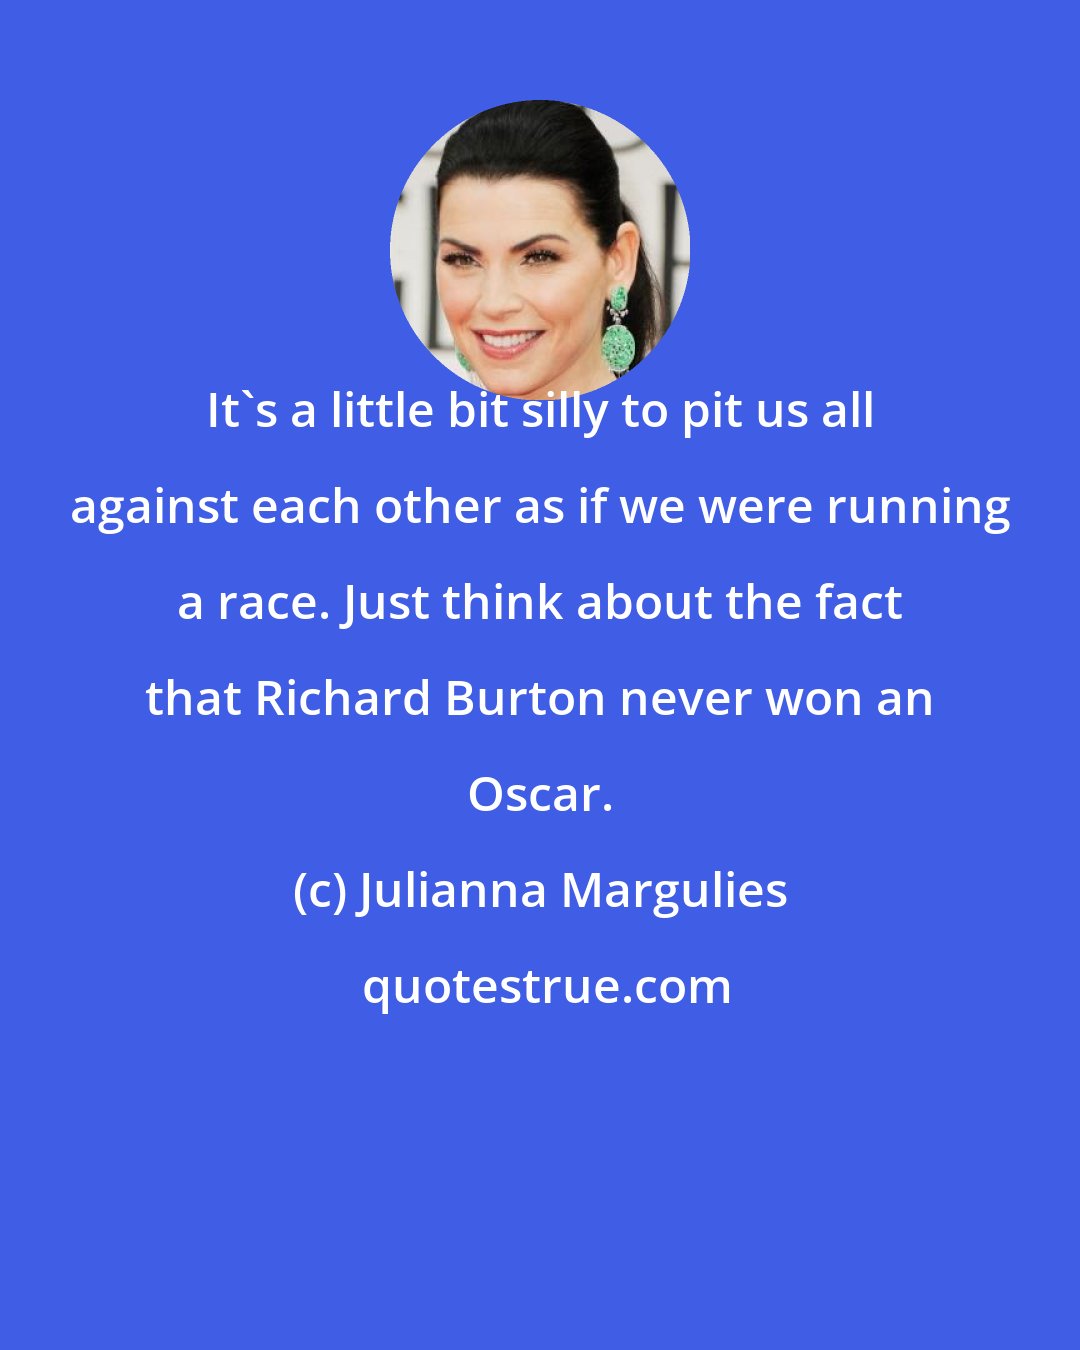 Julianna Margulies: It's a little bit silly to pit us all against each other as if we were running a race. Just think about the fact that Richard Burton never won an Oscar.